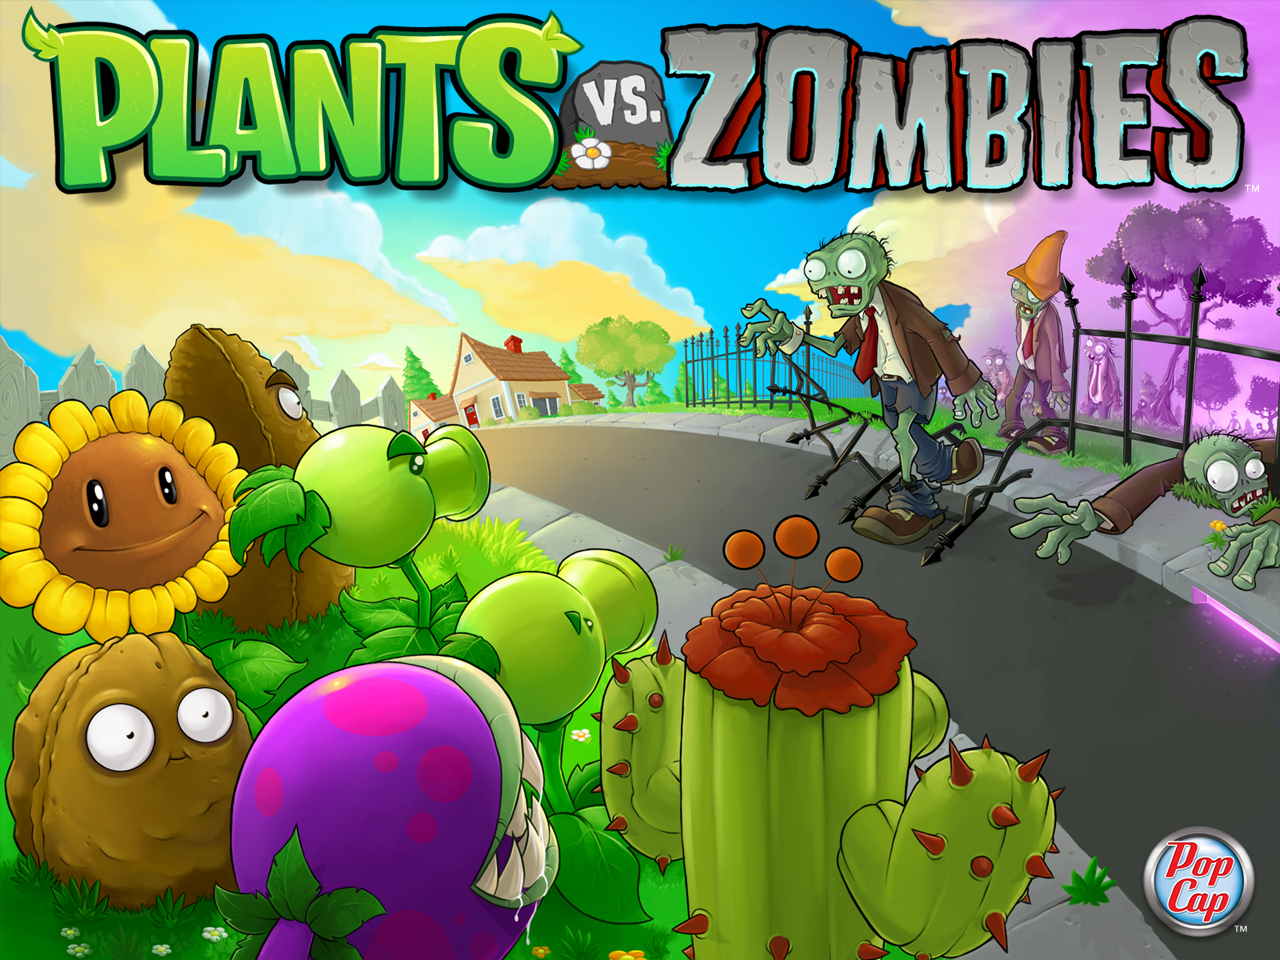 CONTACT :: Plants vs. Zombies full game free pc, download 